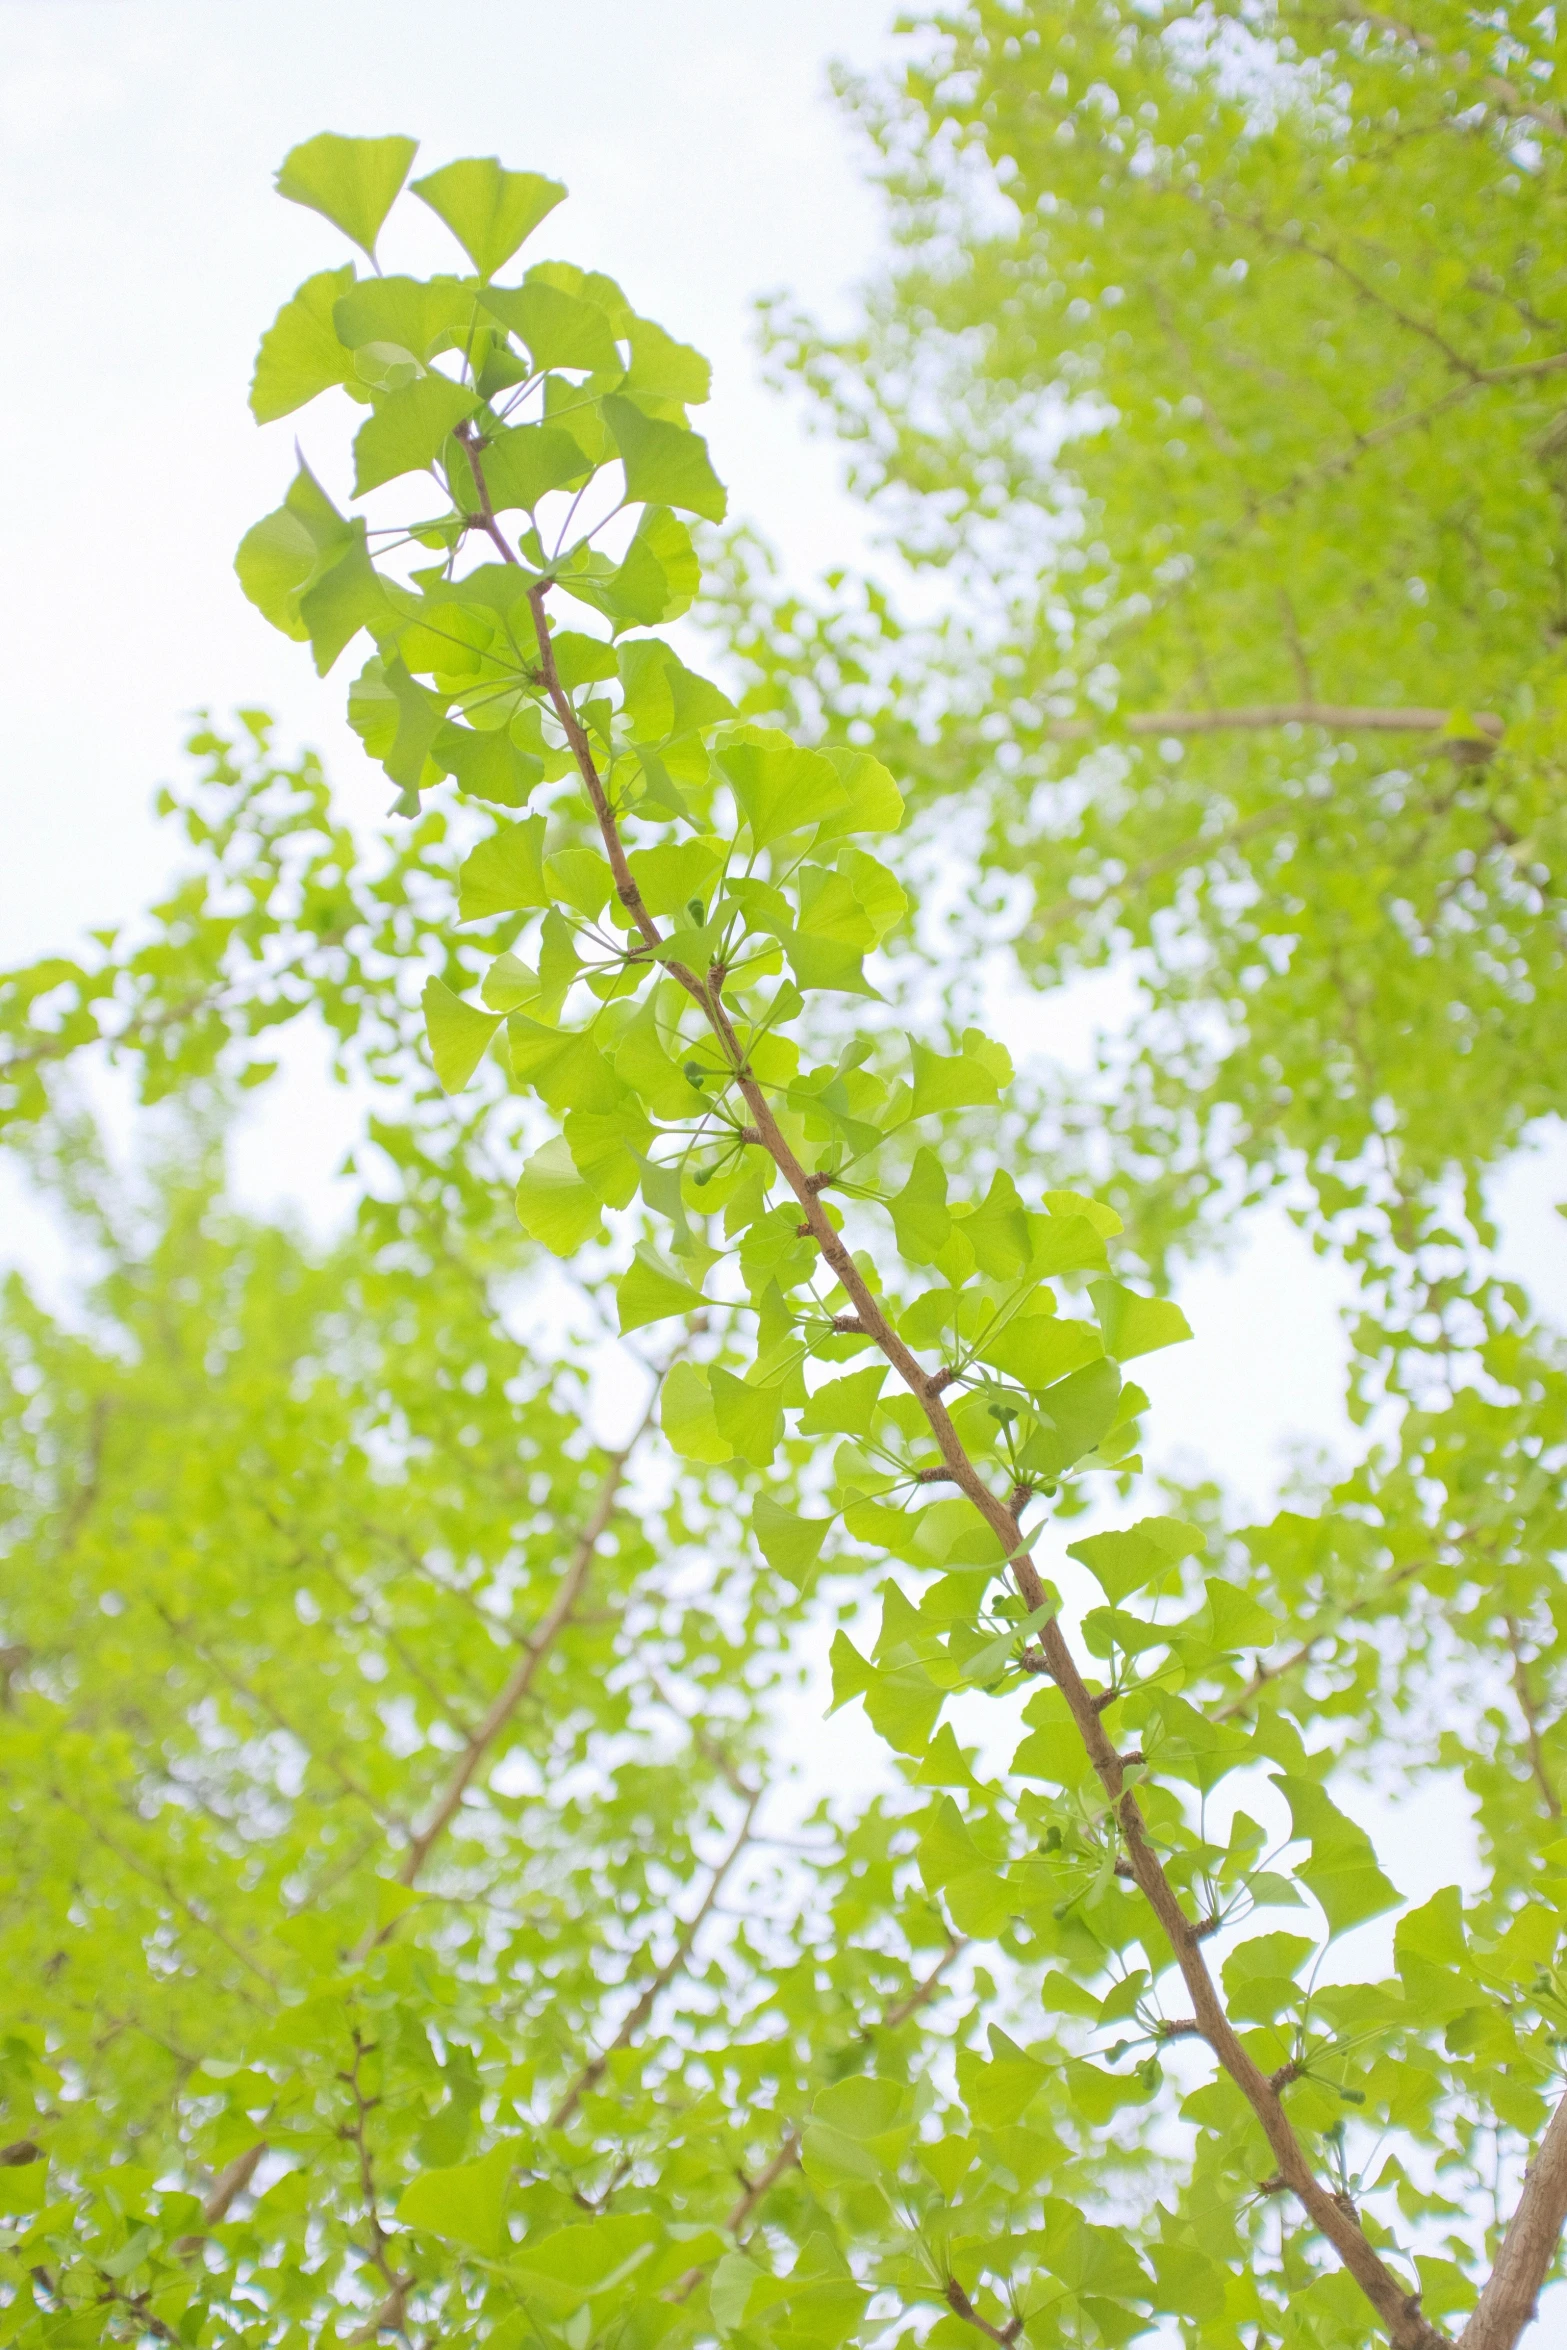 a close up view of some trees with green leaves